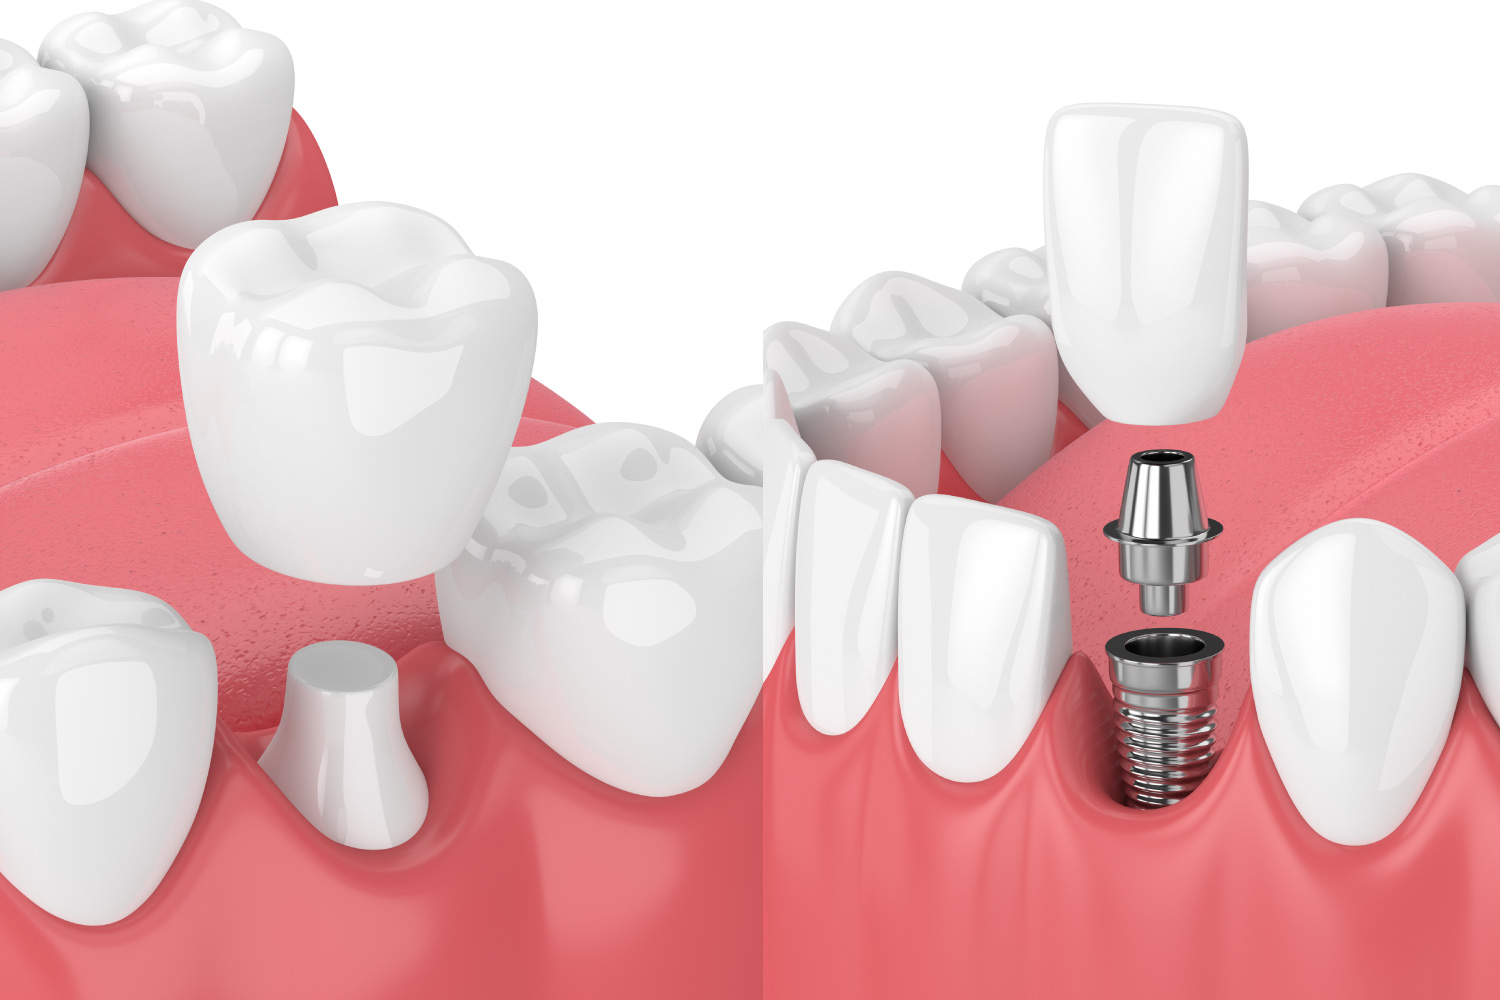 Closeup Of A Dental Crown Covering A Natural Tooth Next To A Dental Crown Topping A Dental Implant